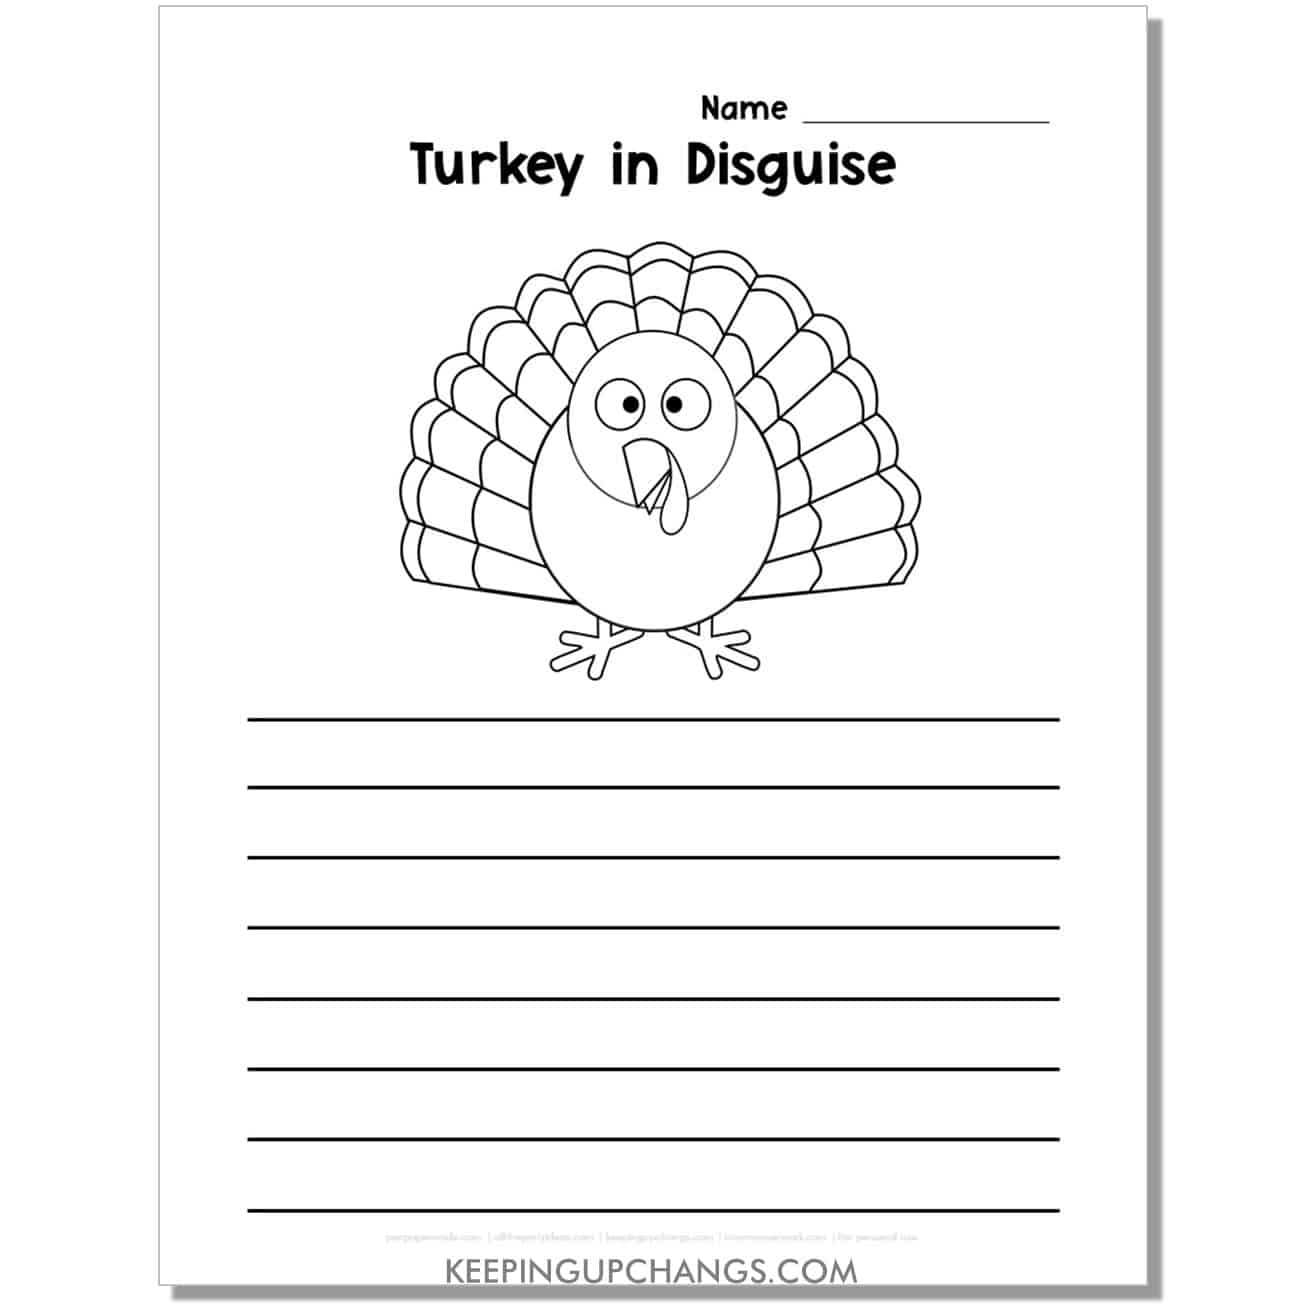 hide the turkey printable template with picture and lines for writing.